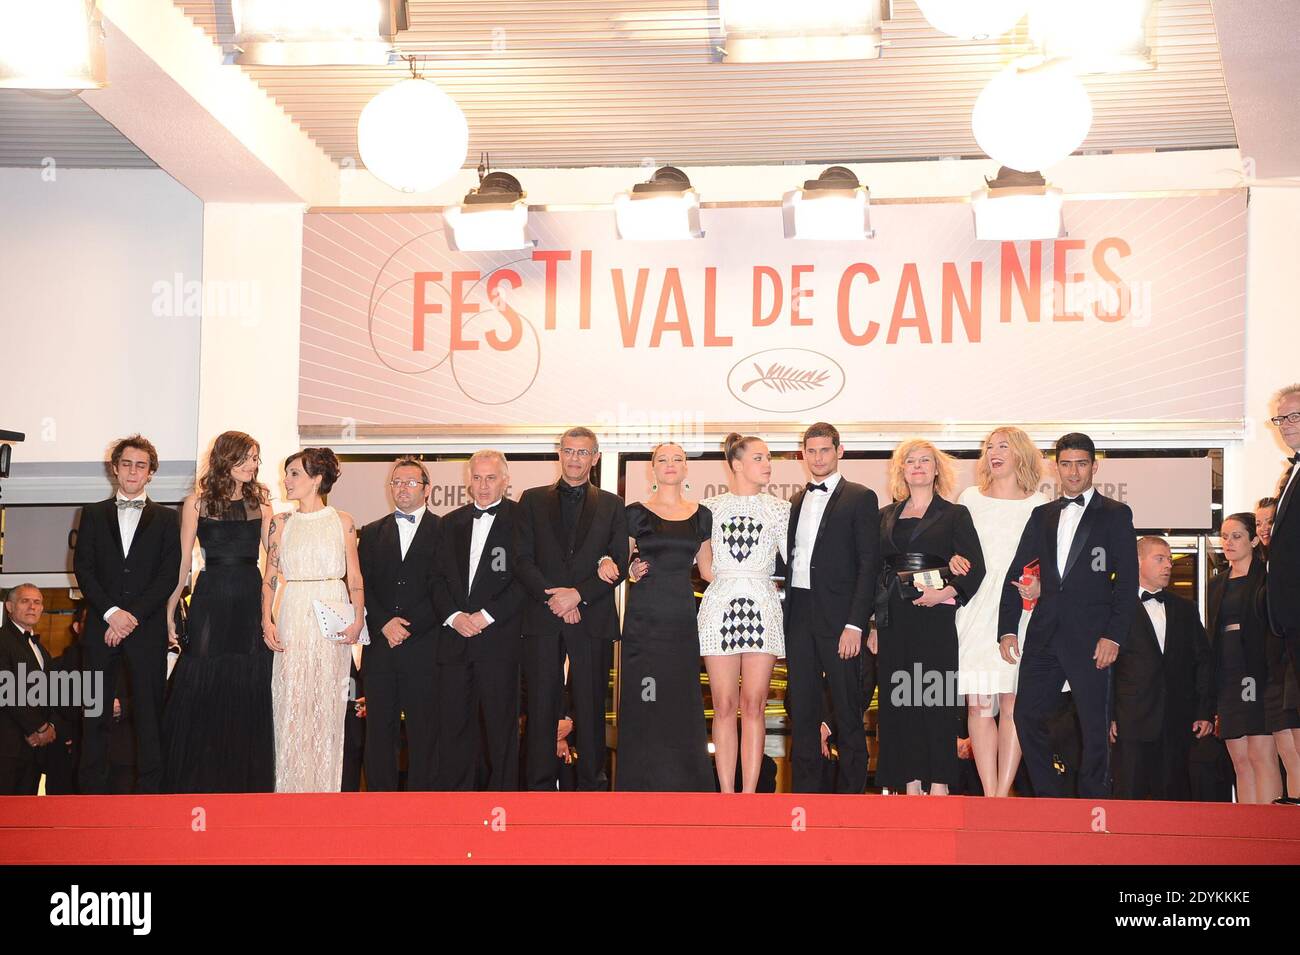 Director Abdellatif Kechiche, Lea Seydoux, Vincent Maraval, Adele Exarchopoulos, Brahim Chioua arriving for La Vie D'Adele screening held at the Palais Des Festivals as part of the 66th Cannes Film Festival in Cannes, France on May 23, 2013. Photo by Nicolas Briquet/ABACAPRESS.COM Stock Photo